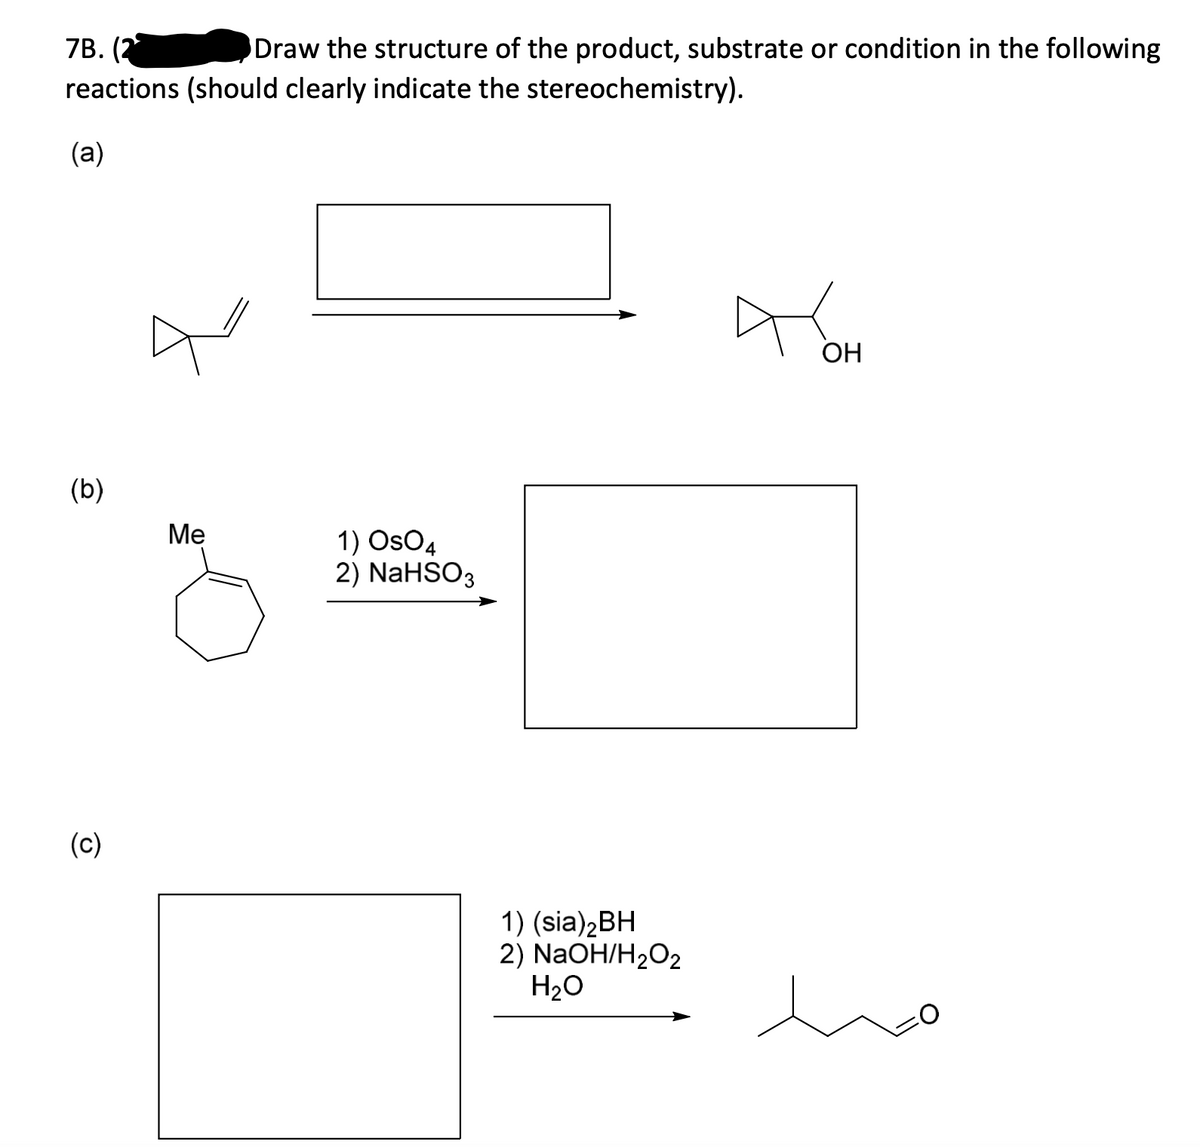 7B.
(2
reactions (should clearly indicate the stereochemistry).
Draw the structure of the product, substrate or condition in the following
(a)
ОН
(b)
Ме
1) OsO4
2) NaHSO3
(c)
1) (sia)2BH
2) NaOH/H2O2
H20
